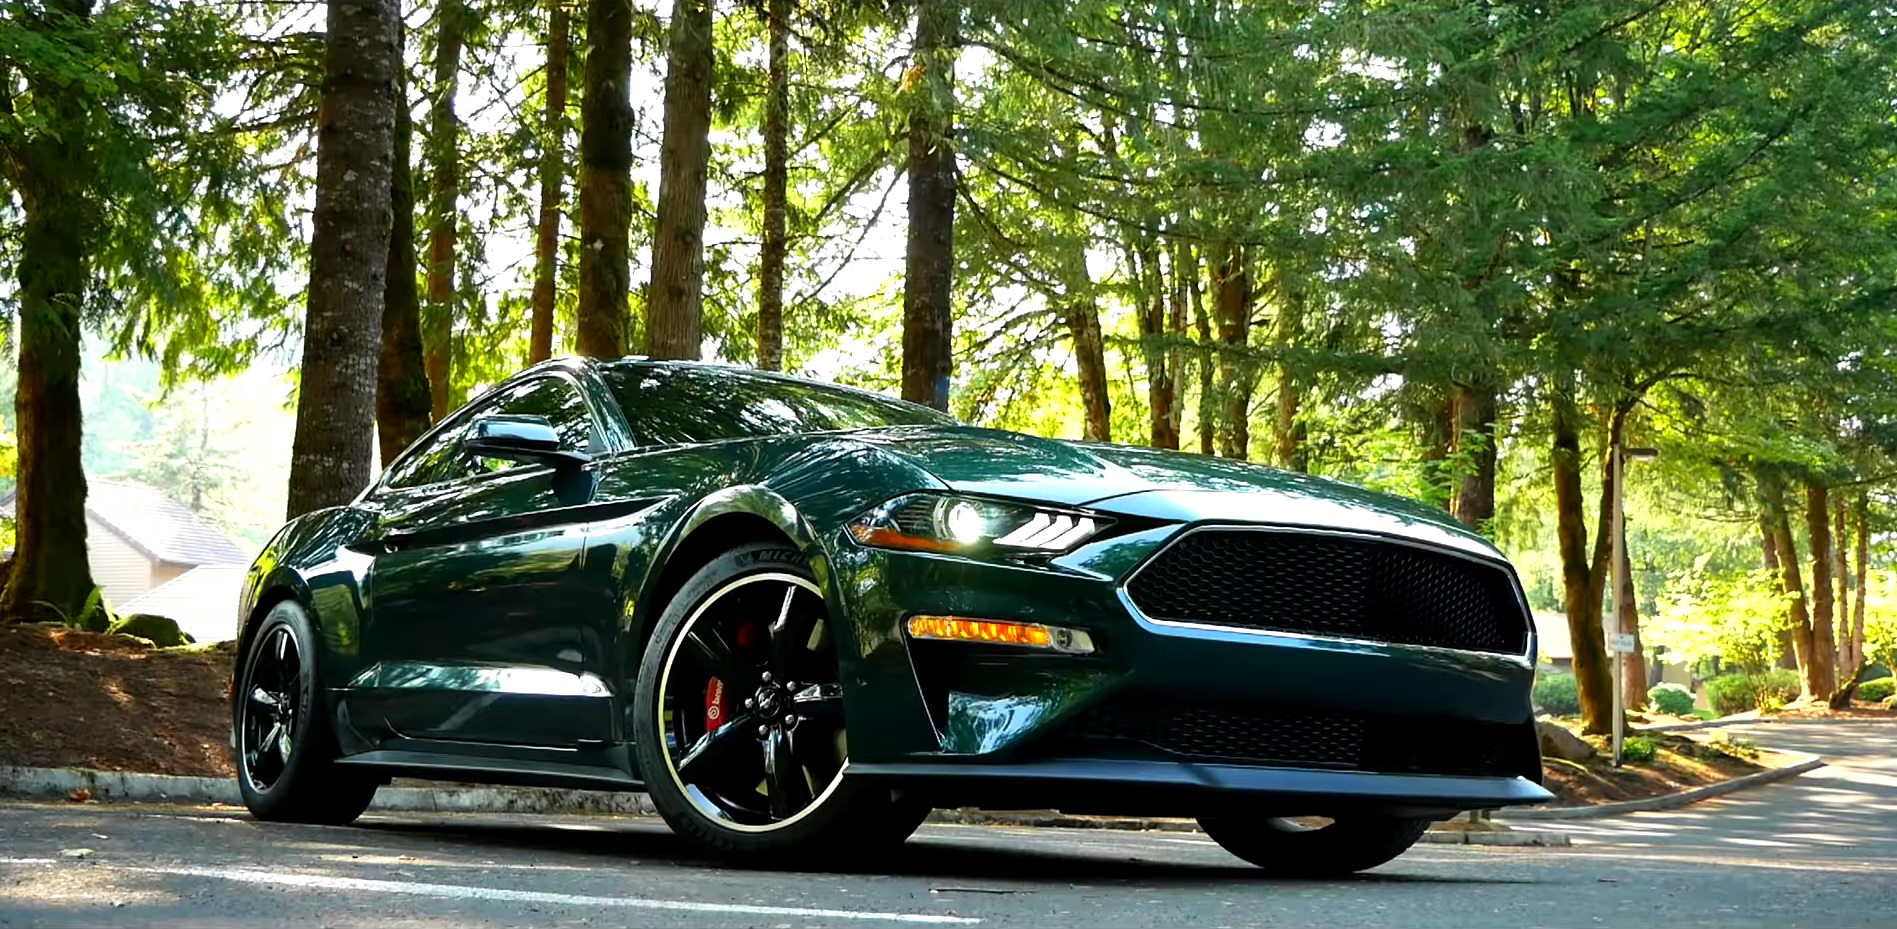 Video: Is The New 2019 Ford Mustang Bullitt Worthy Of The Iconic Name?